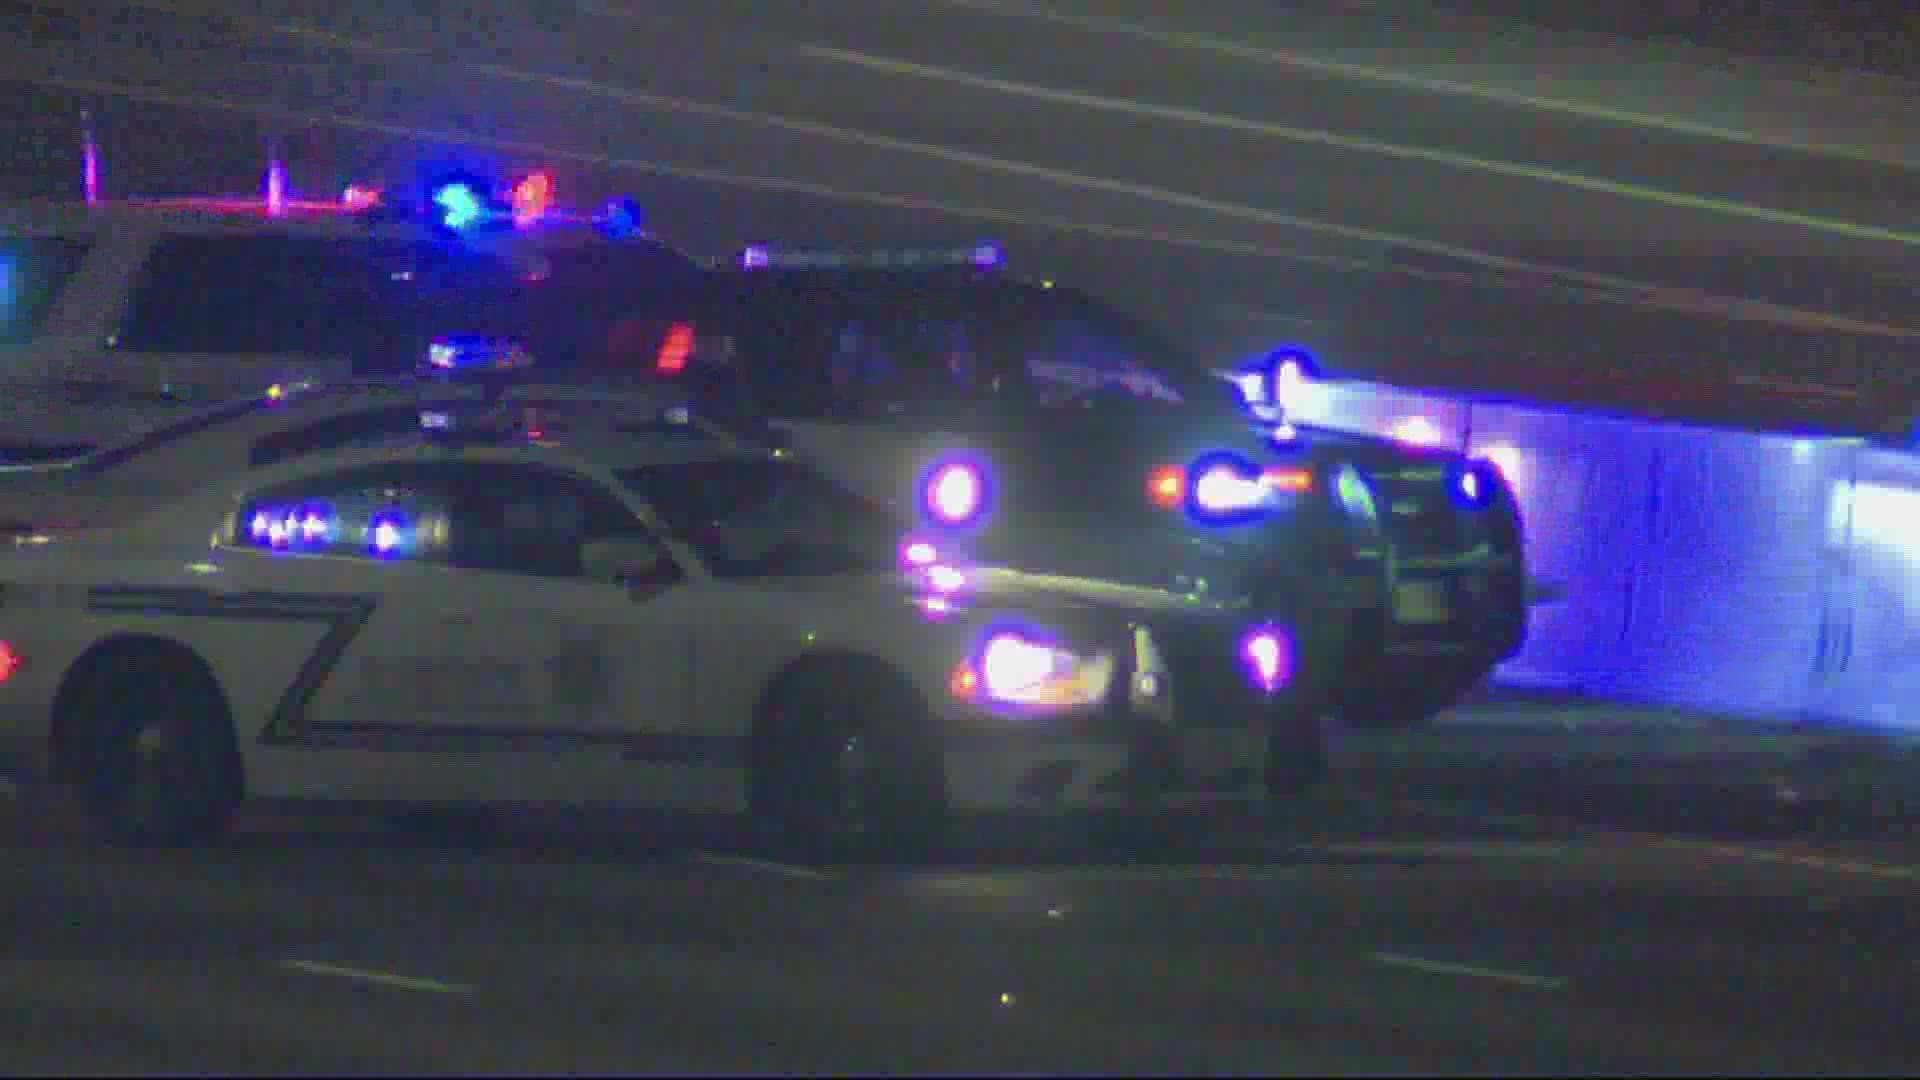 Clackamas County Sheriff's deputies shot and killed a driver after a chase and crash on Interstate 205 Wednesday, Jan. 26. The freeway was closed for several hours.